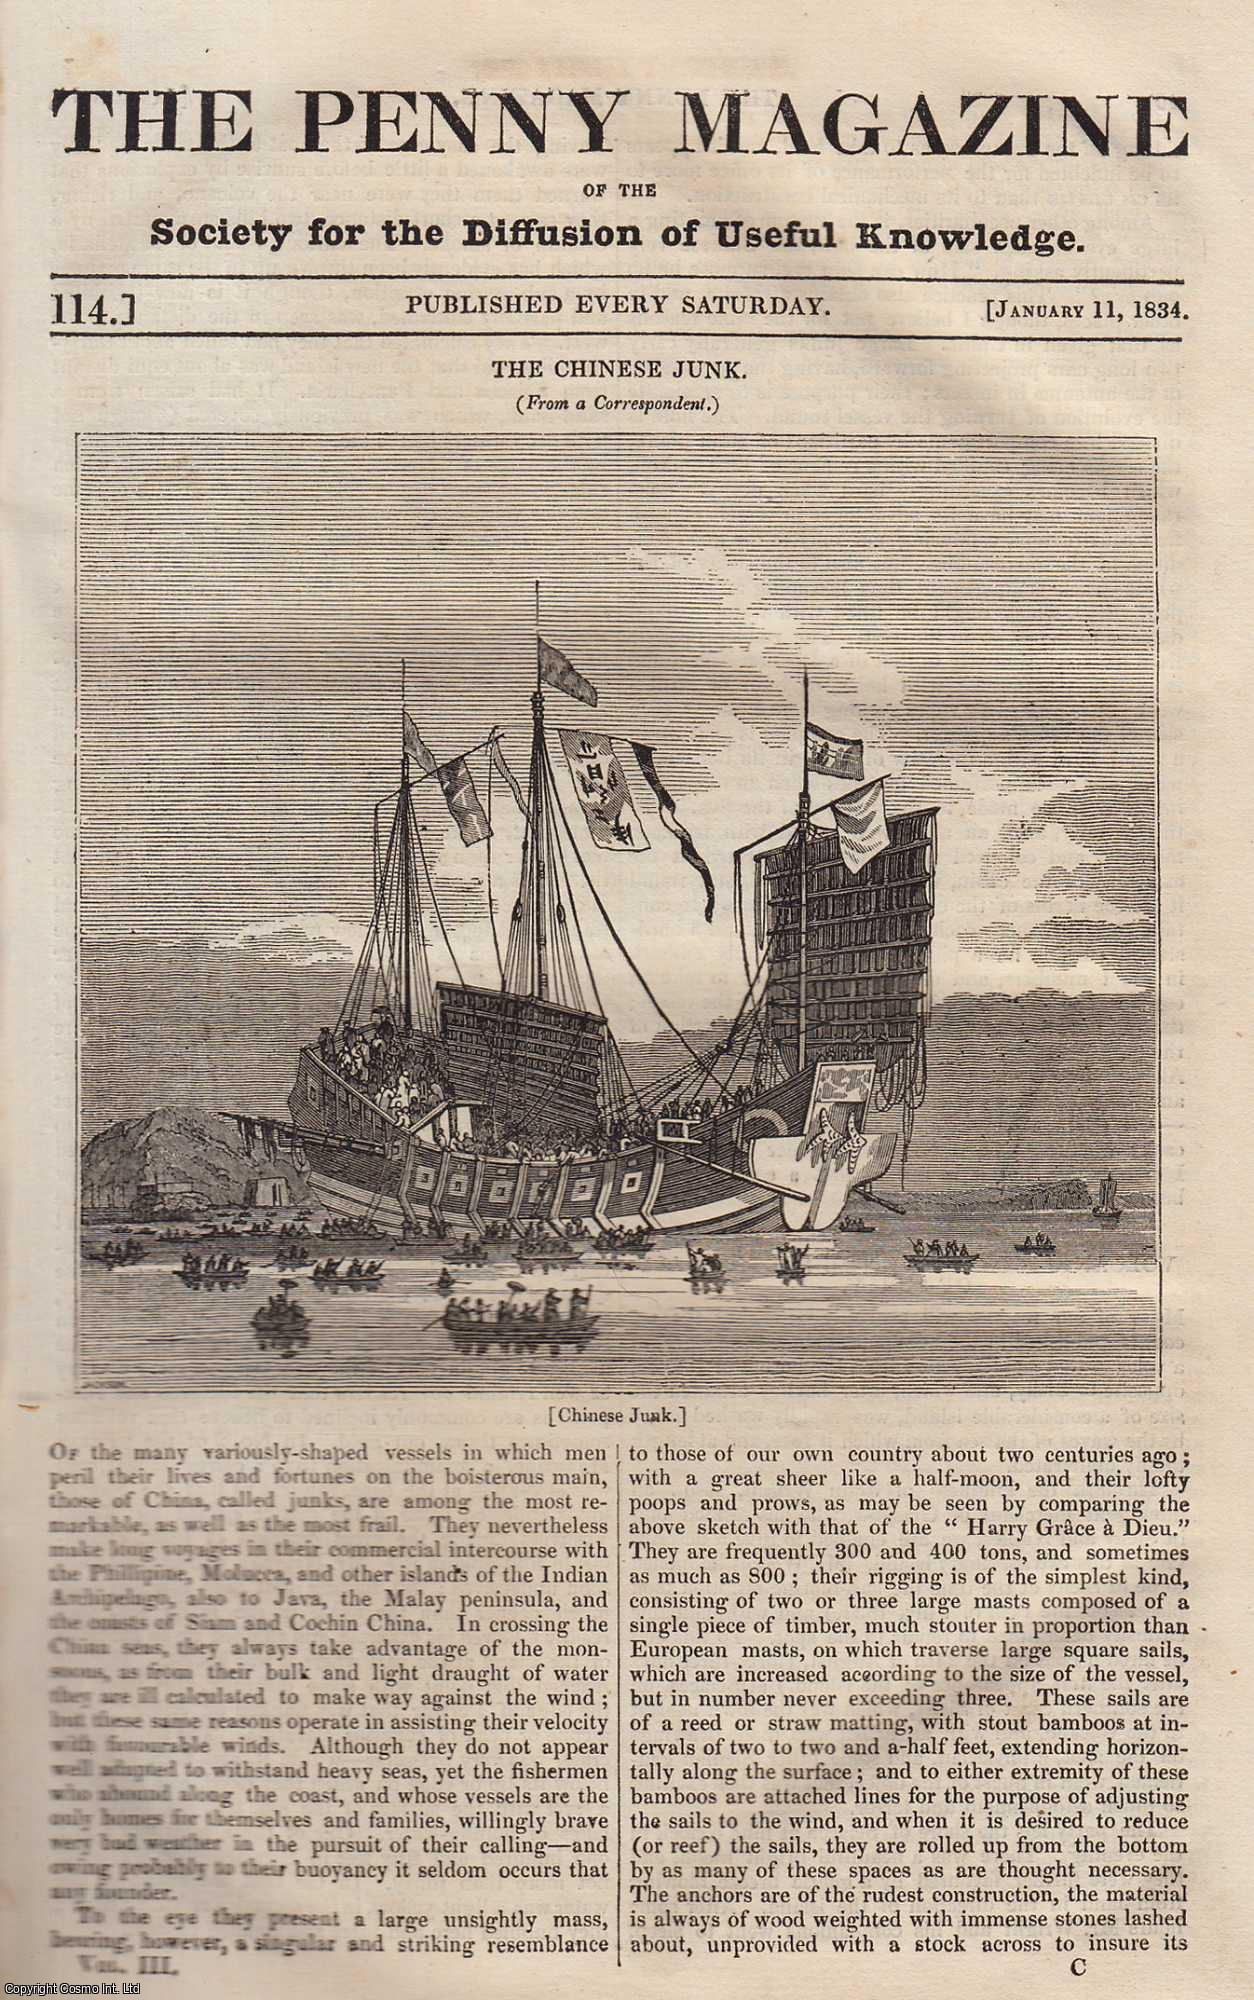 Penny Magazine - Chinese Junk (ship); Volcanic Island off The South Coast of Sicily; Improved System of Bee Management; The Town-Hall of Louvian; The Newfoundland Dog, etc. Issue No. 114, January 11th, 1834. A complete original weekly issue of the Penny Magazine, 1834.